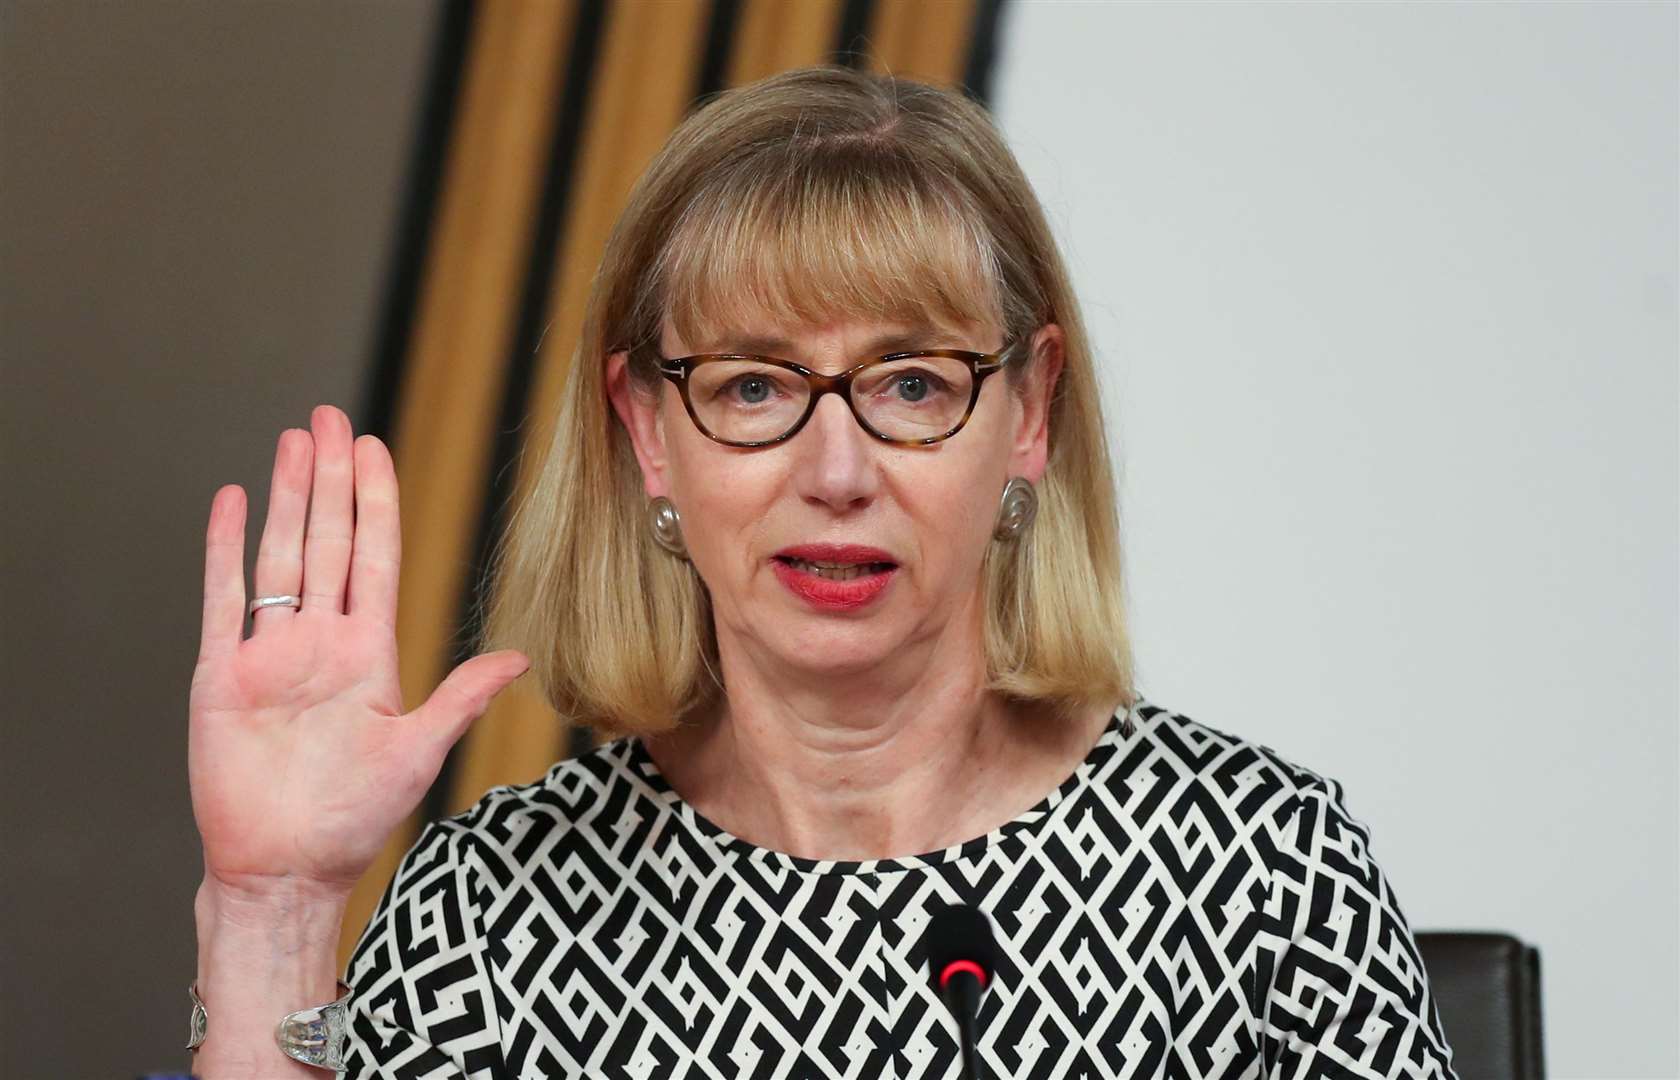 Alex Salmond said Leslie Evans (pictured), the Permanent Secretary, has not taken ‘real responsibility’ for the failings uncovered in the inquiry (Russell Cheyne/PA)